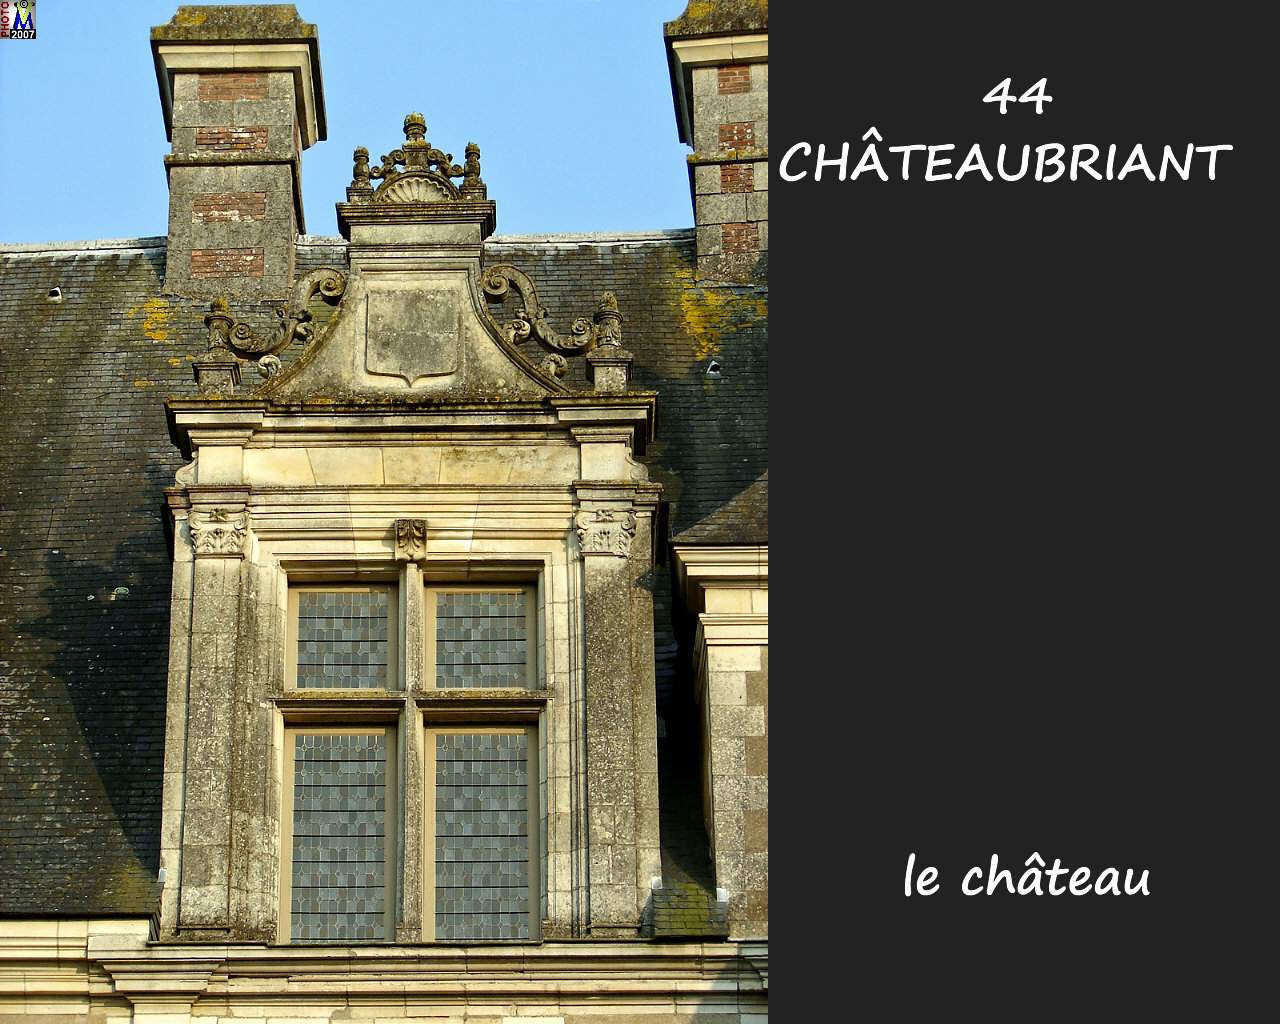 44CHATEAUBRIANT_chateau_228.jpg